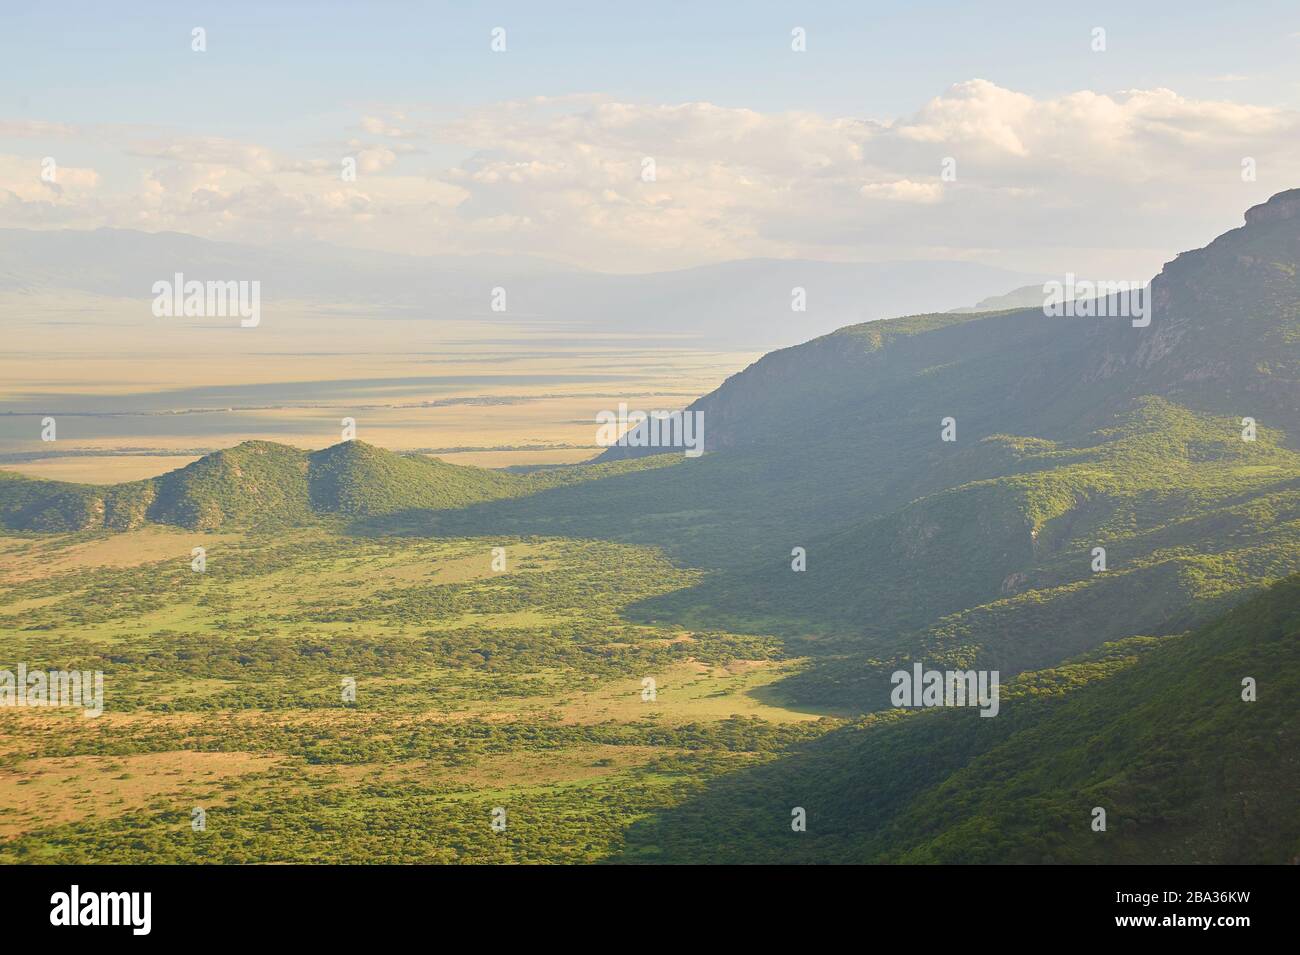 Sanyan plains with the Ngorongoro massif in the background (aerial view) Stock Photo